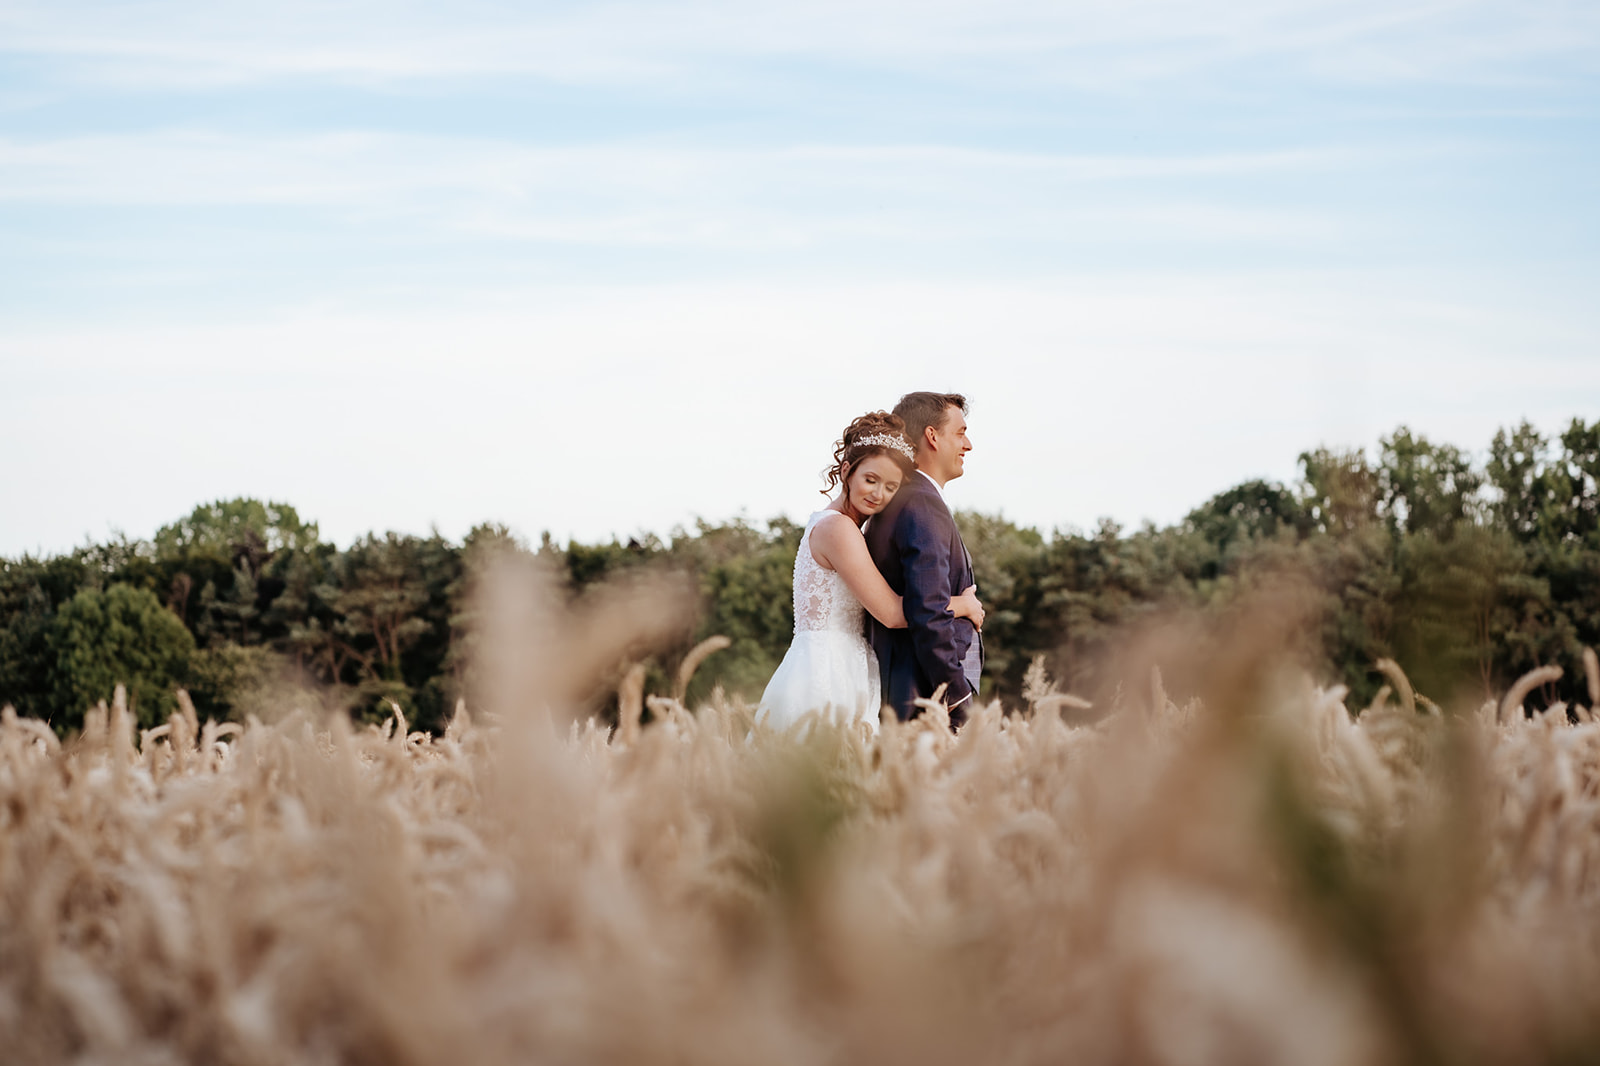 How to book your perfect wedding photographer